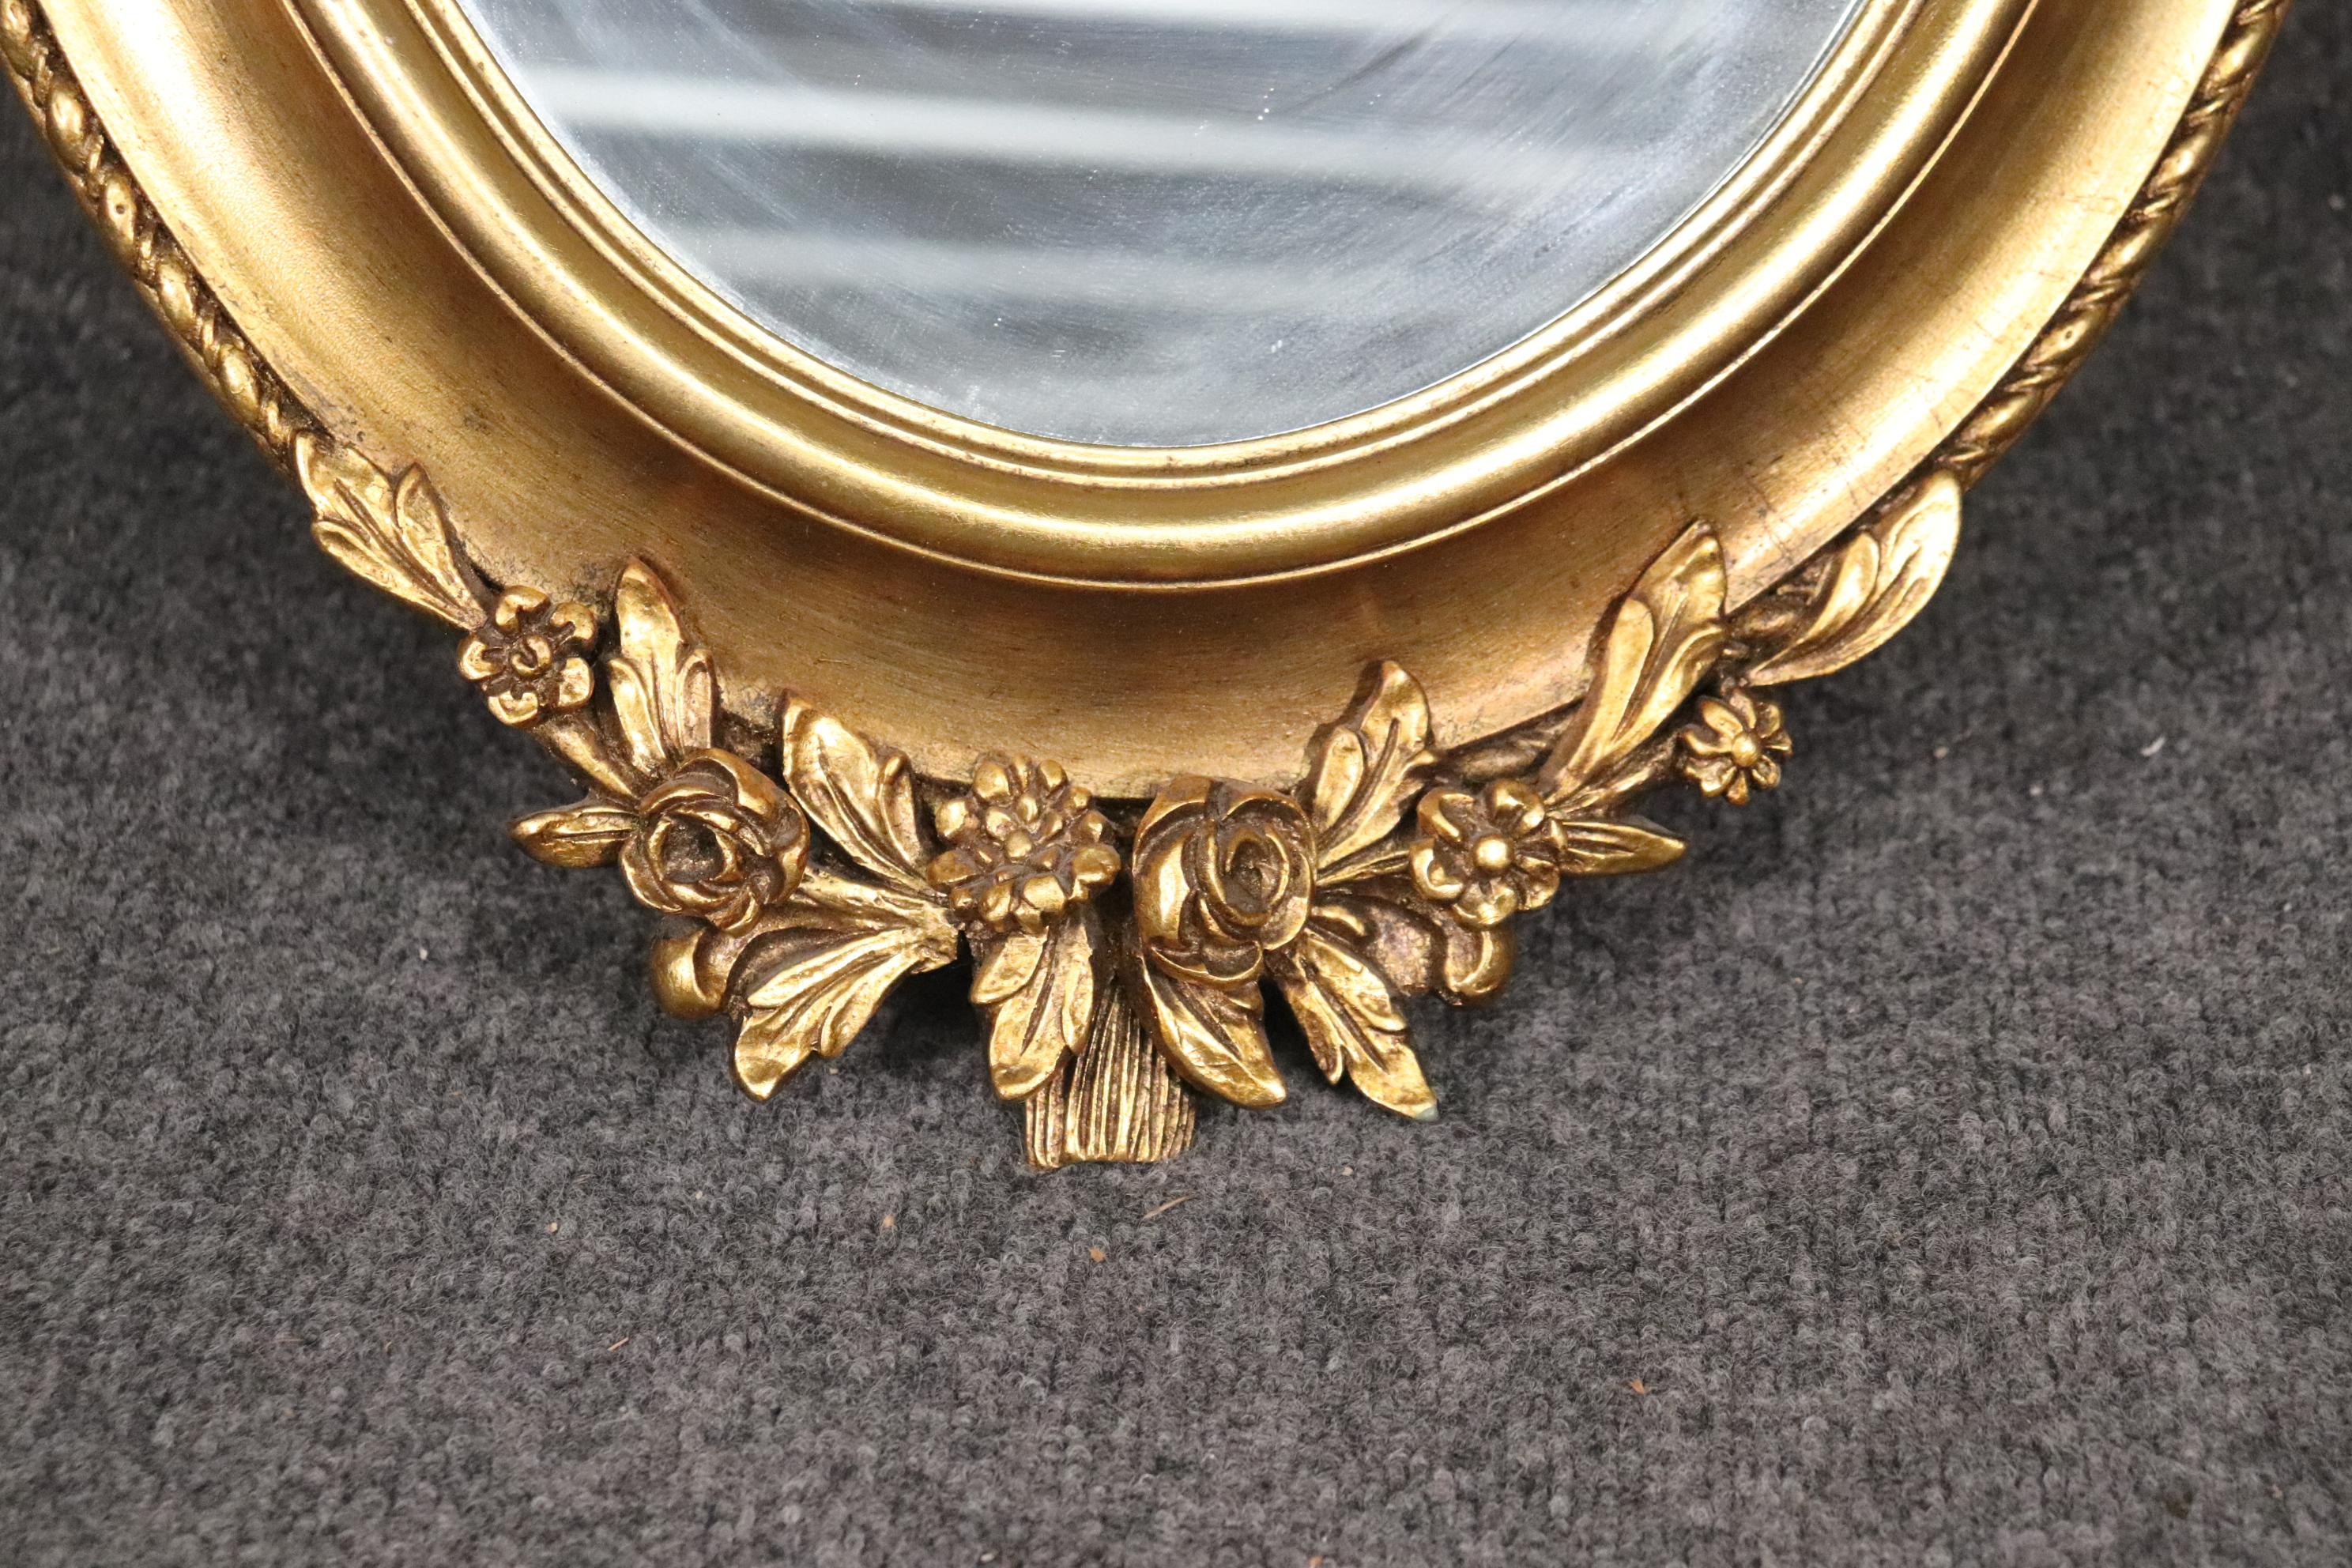 Unknown Gilded Adams Style Oval Mirror with Decorative Elements